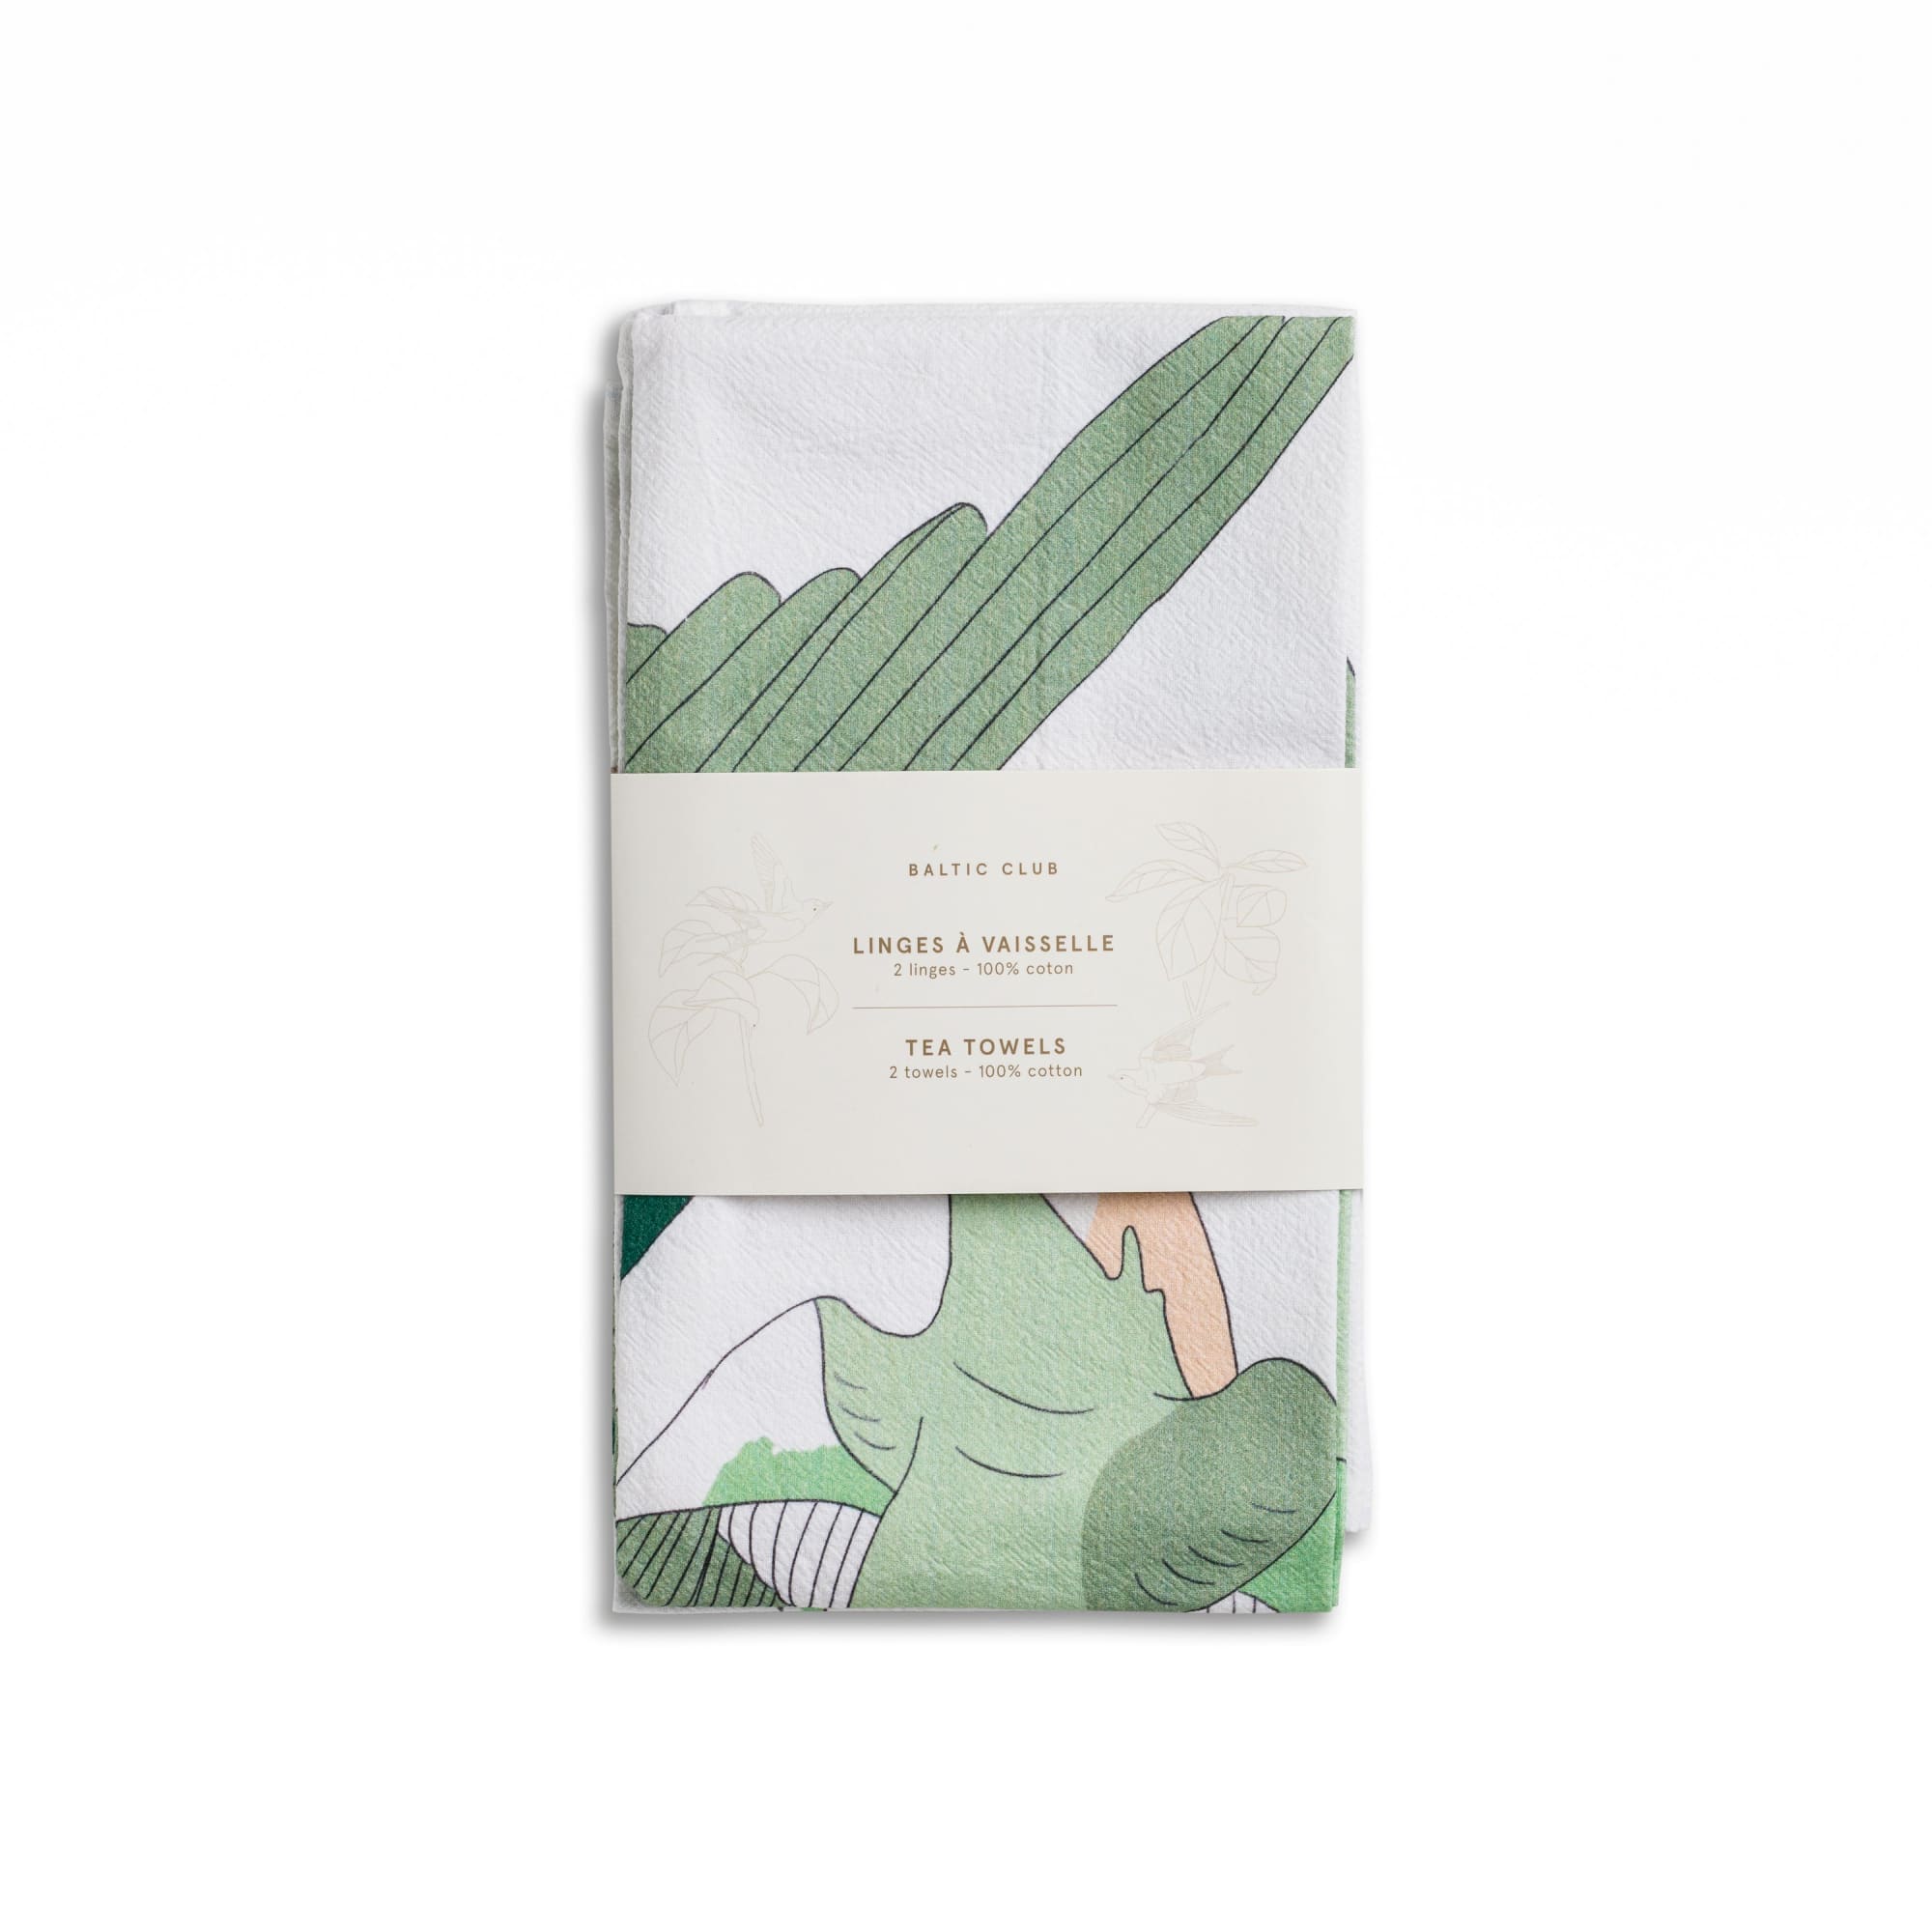 Packaging of the Acrobat tea towels by the Baltic Club